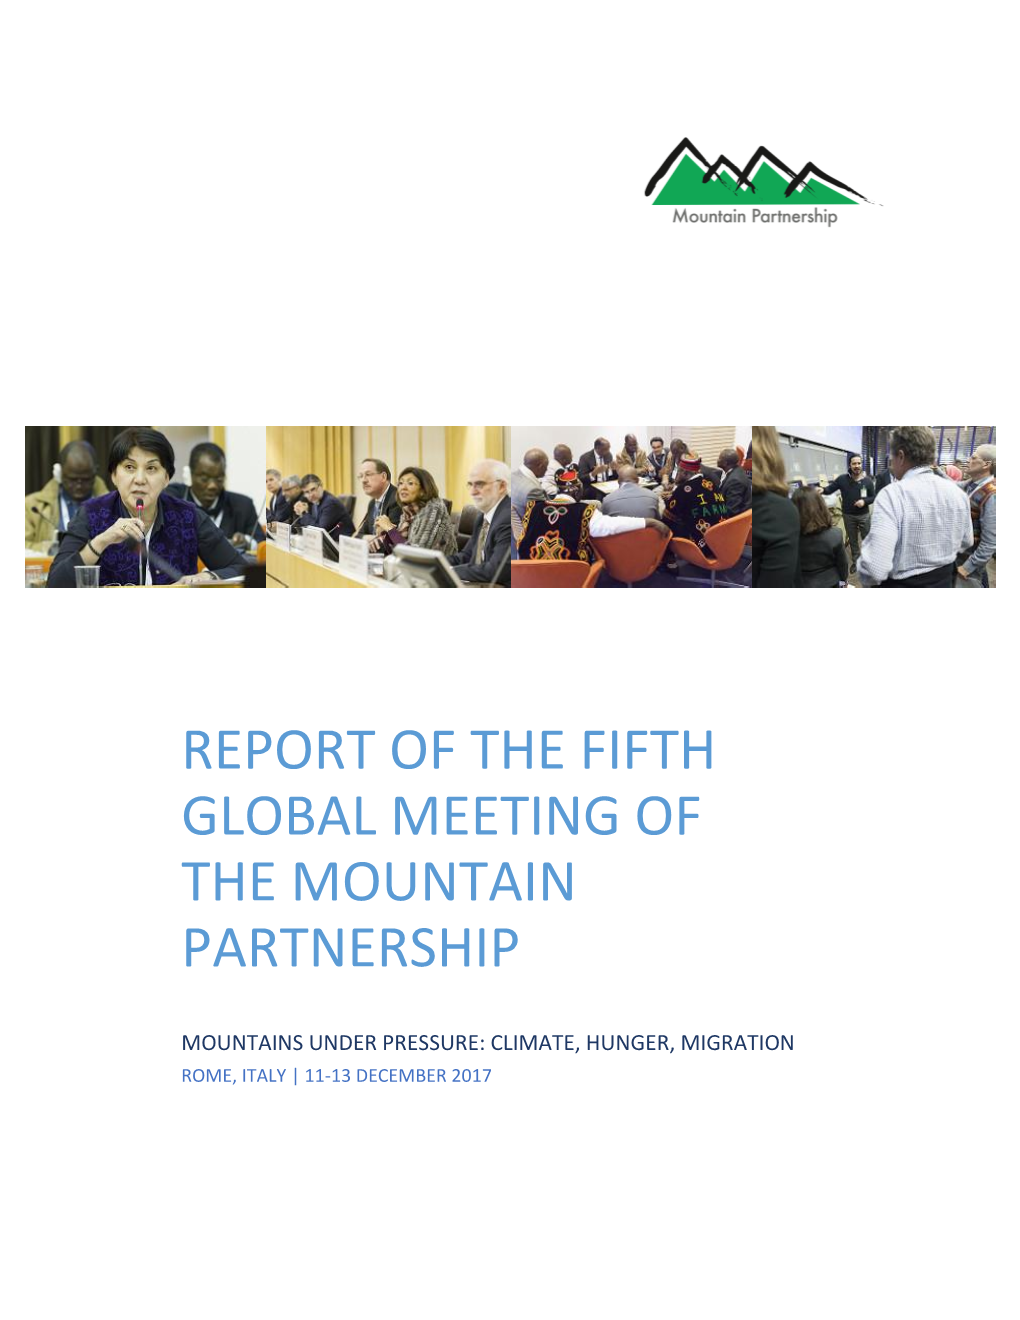 Report of the Fifth Global Meeting of the Mountain Partnership